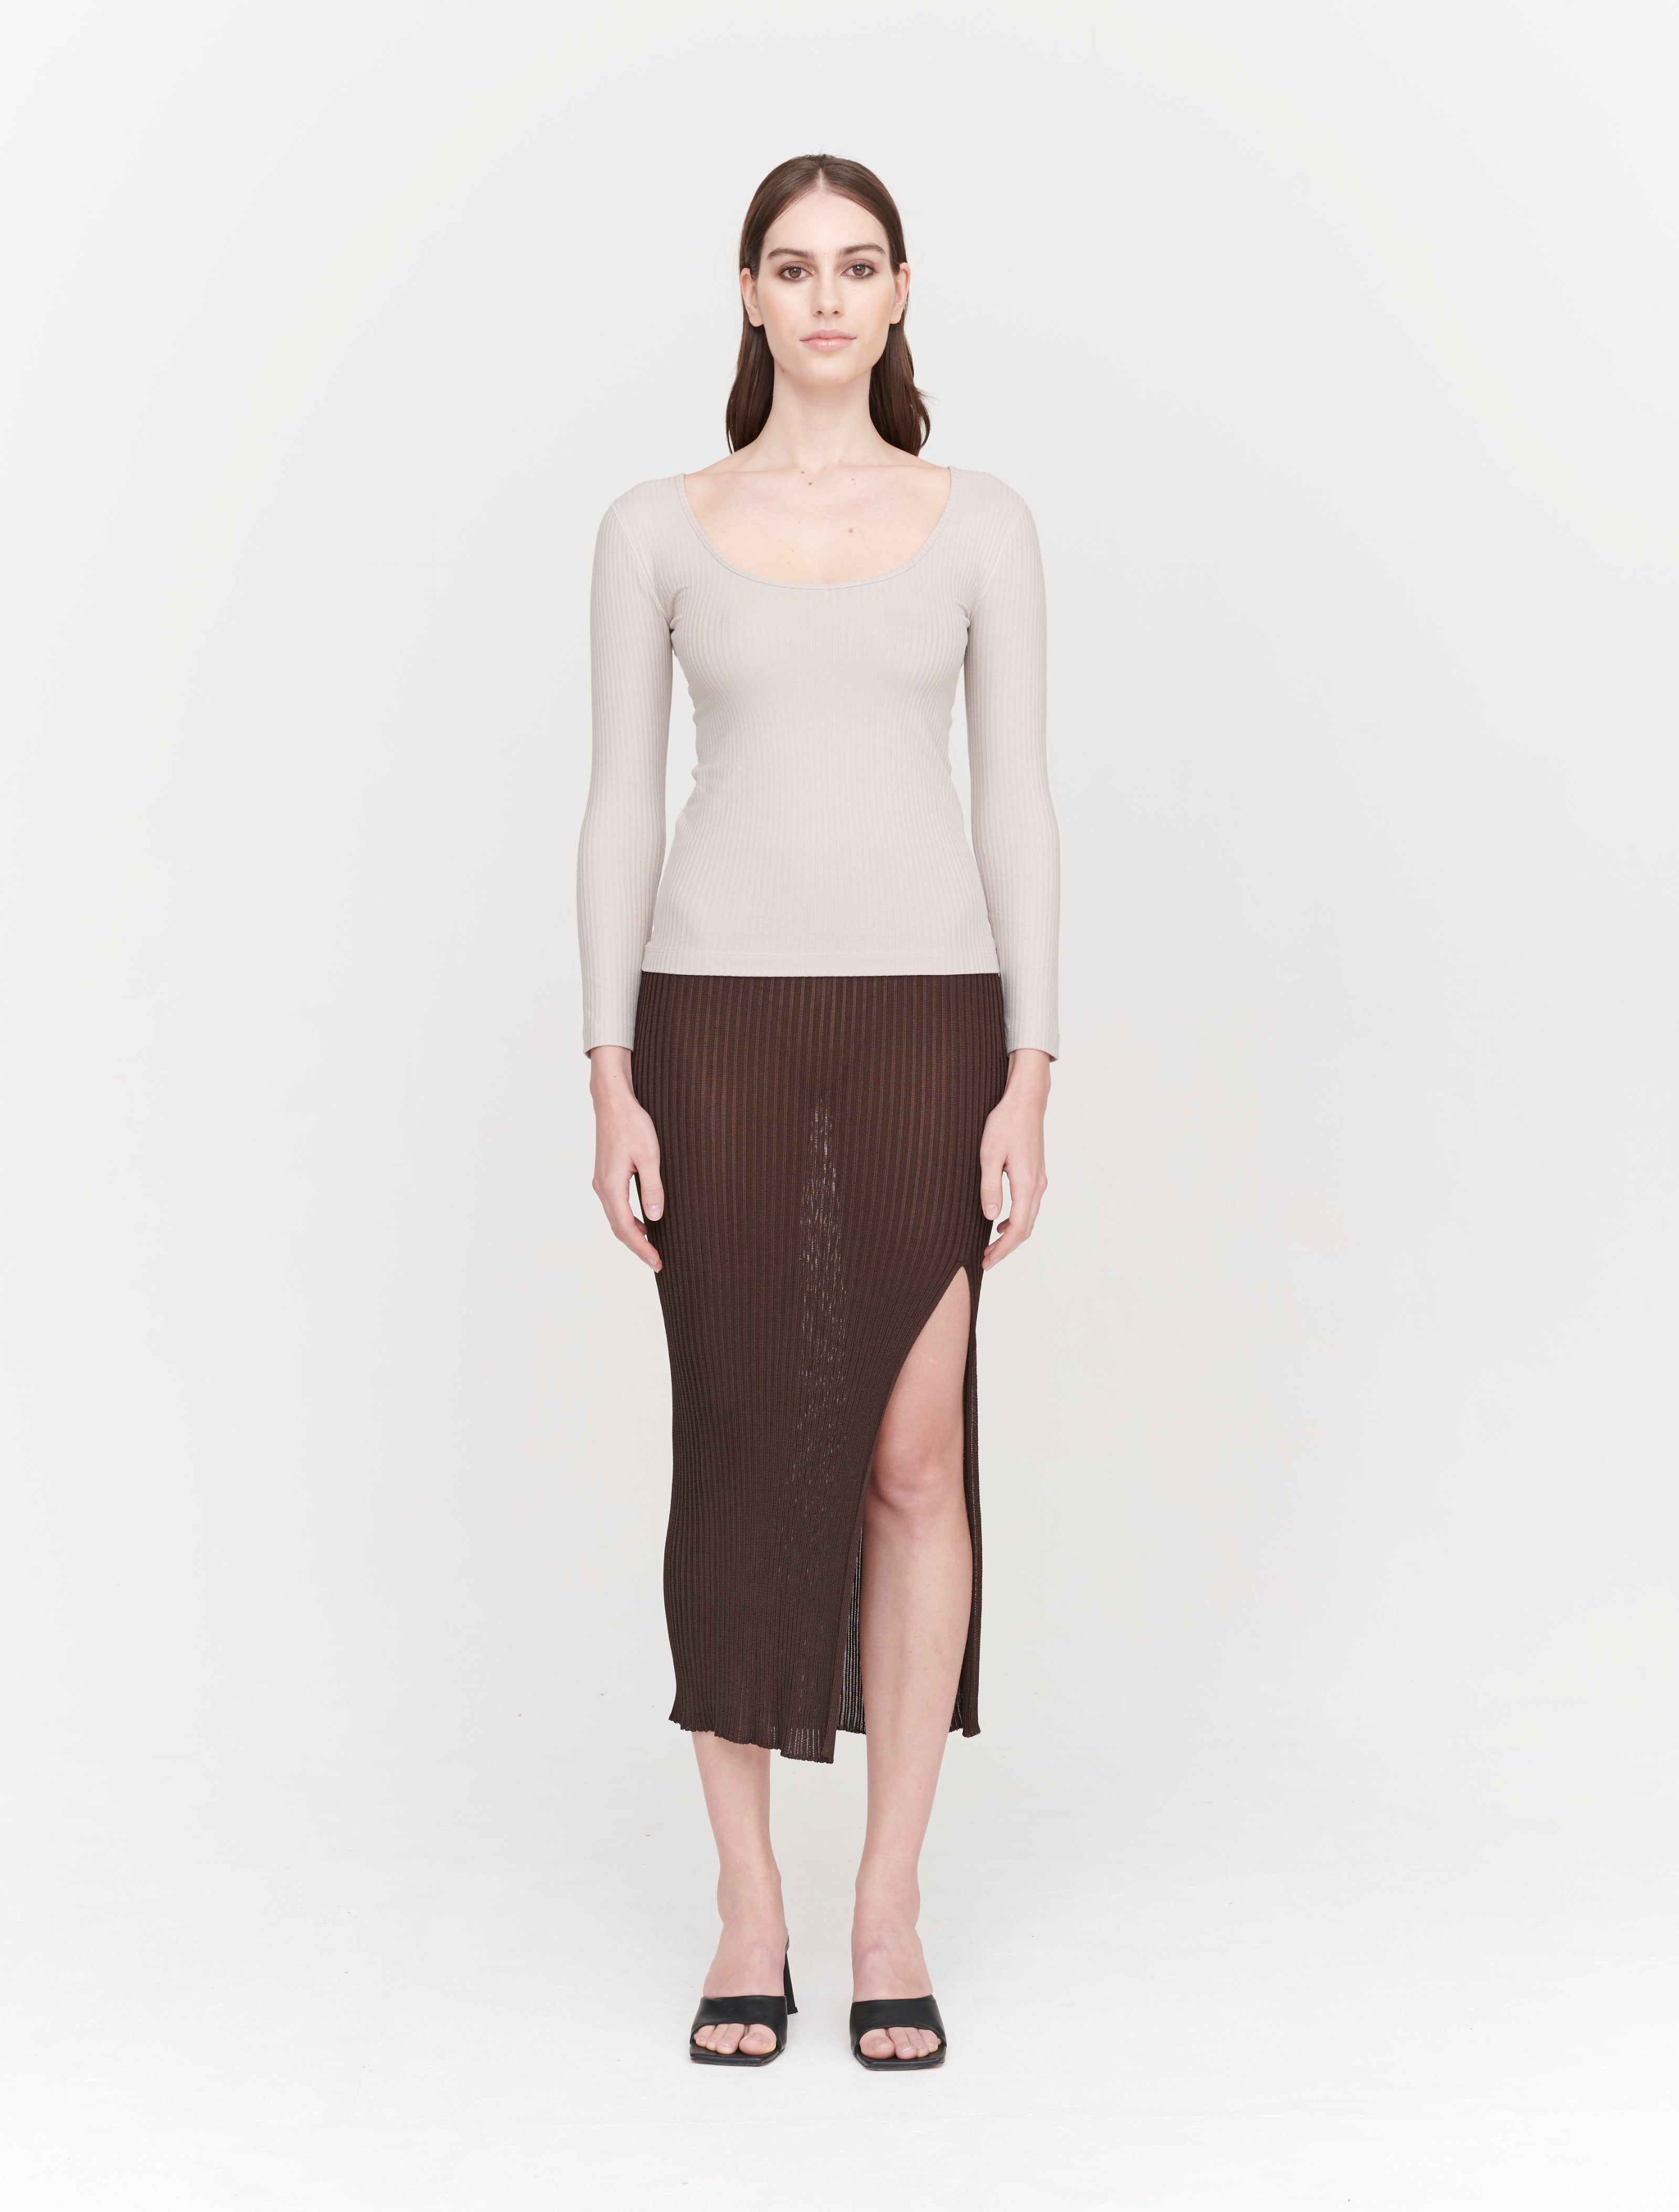 Ninety Percent Amelia SeaCell Rib Scoop Neck in Taupe